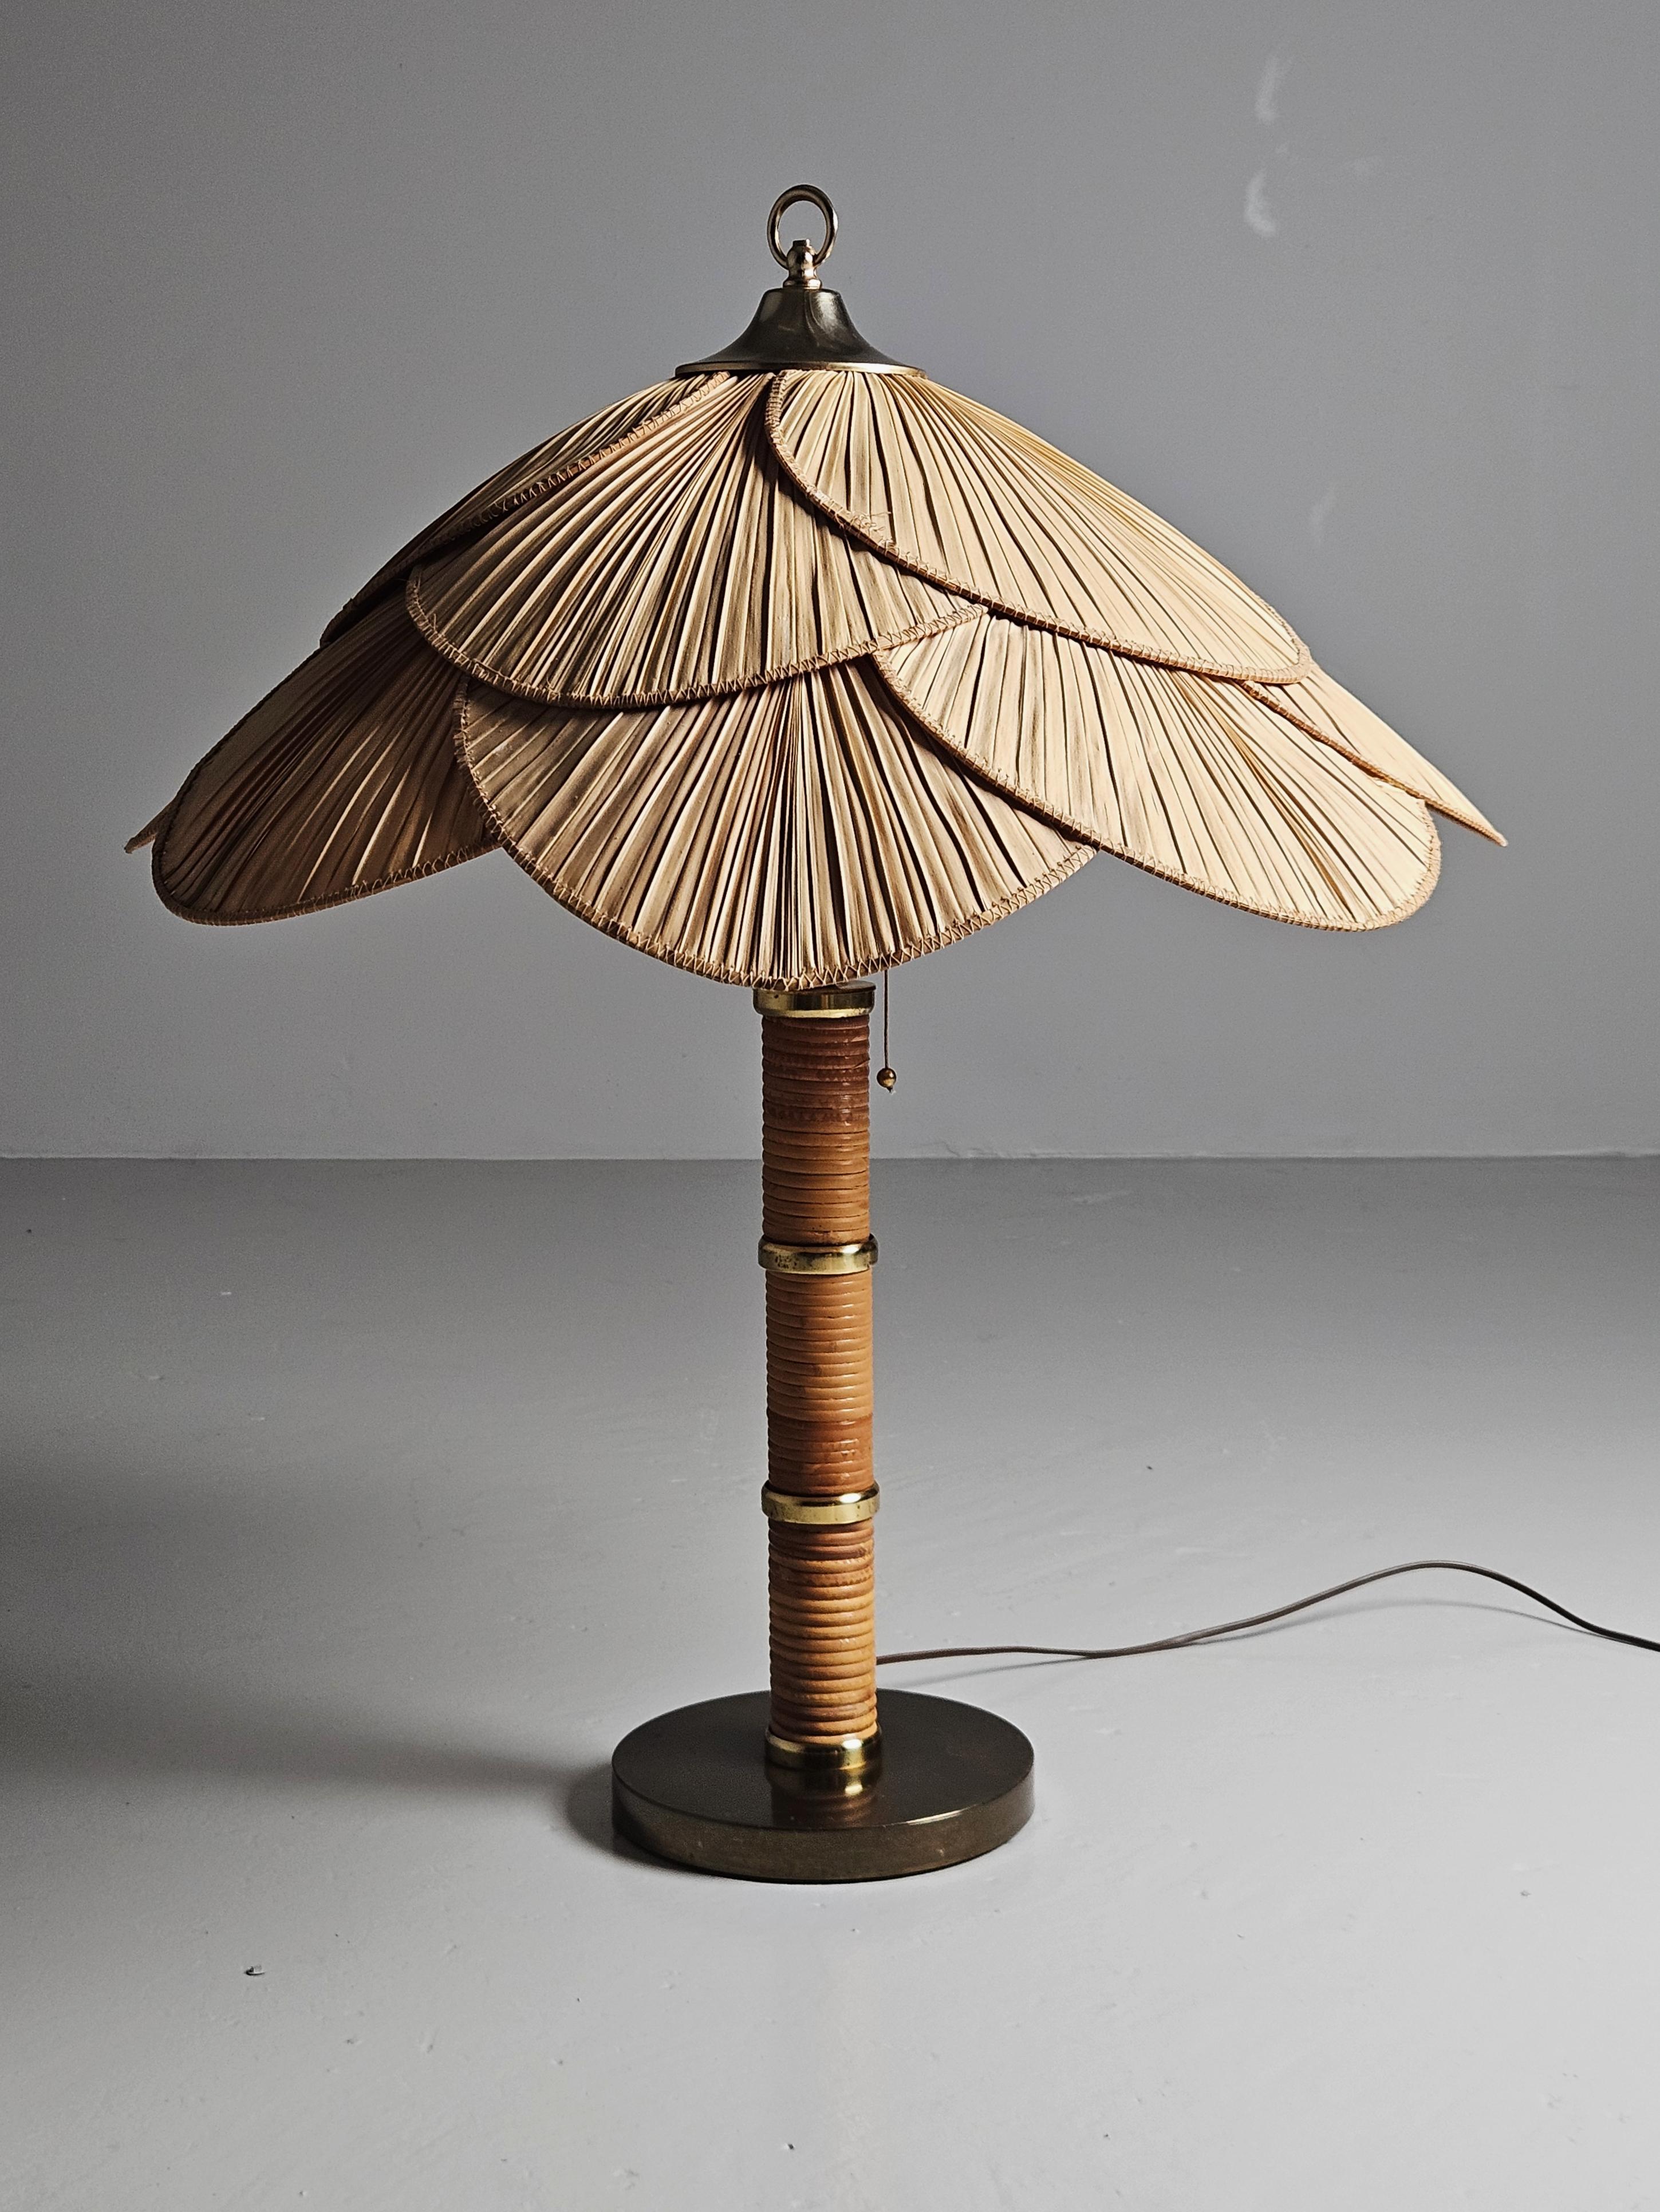 Very rare table lamp produced by Miranda AB in Svedala, Sweden. Designer is unknown.

Big sized, brass wrapped in rattan with a bamboo lamp shade.

In good condition, a few smaller tears/splits and scratches in leaves.